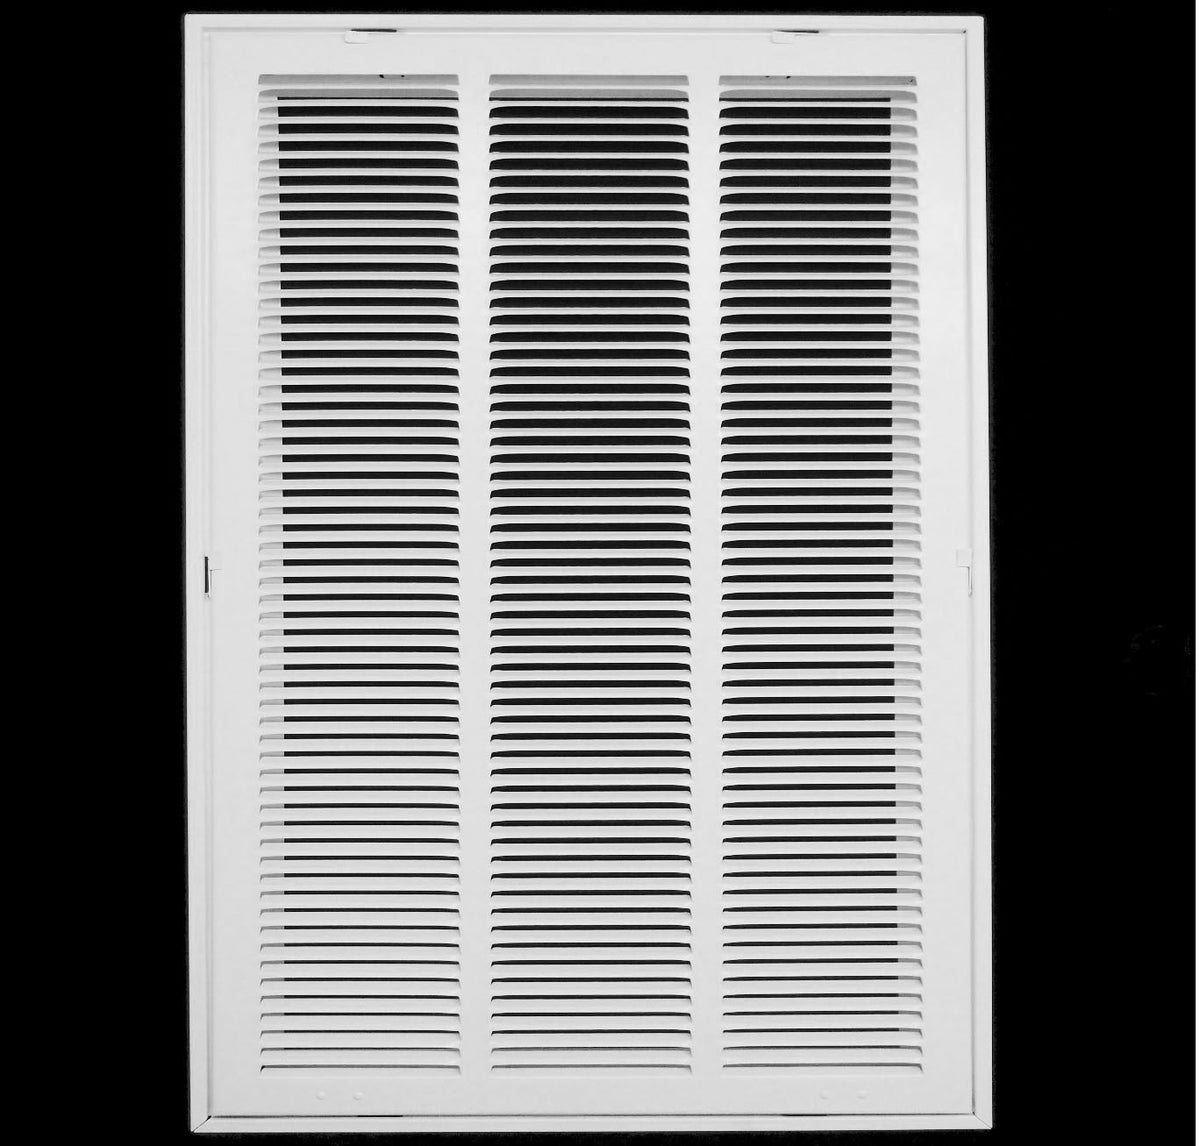 16&quot; X 20&quot; Steel Return Air Filter Grille for 1&quot; Filter - Removable Frame - [Outer Dimensions: 18 5/8&quot; X 22 5/8&quot;]